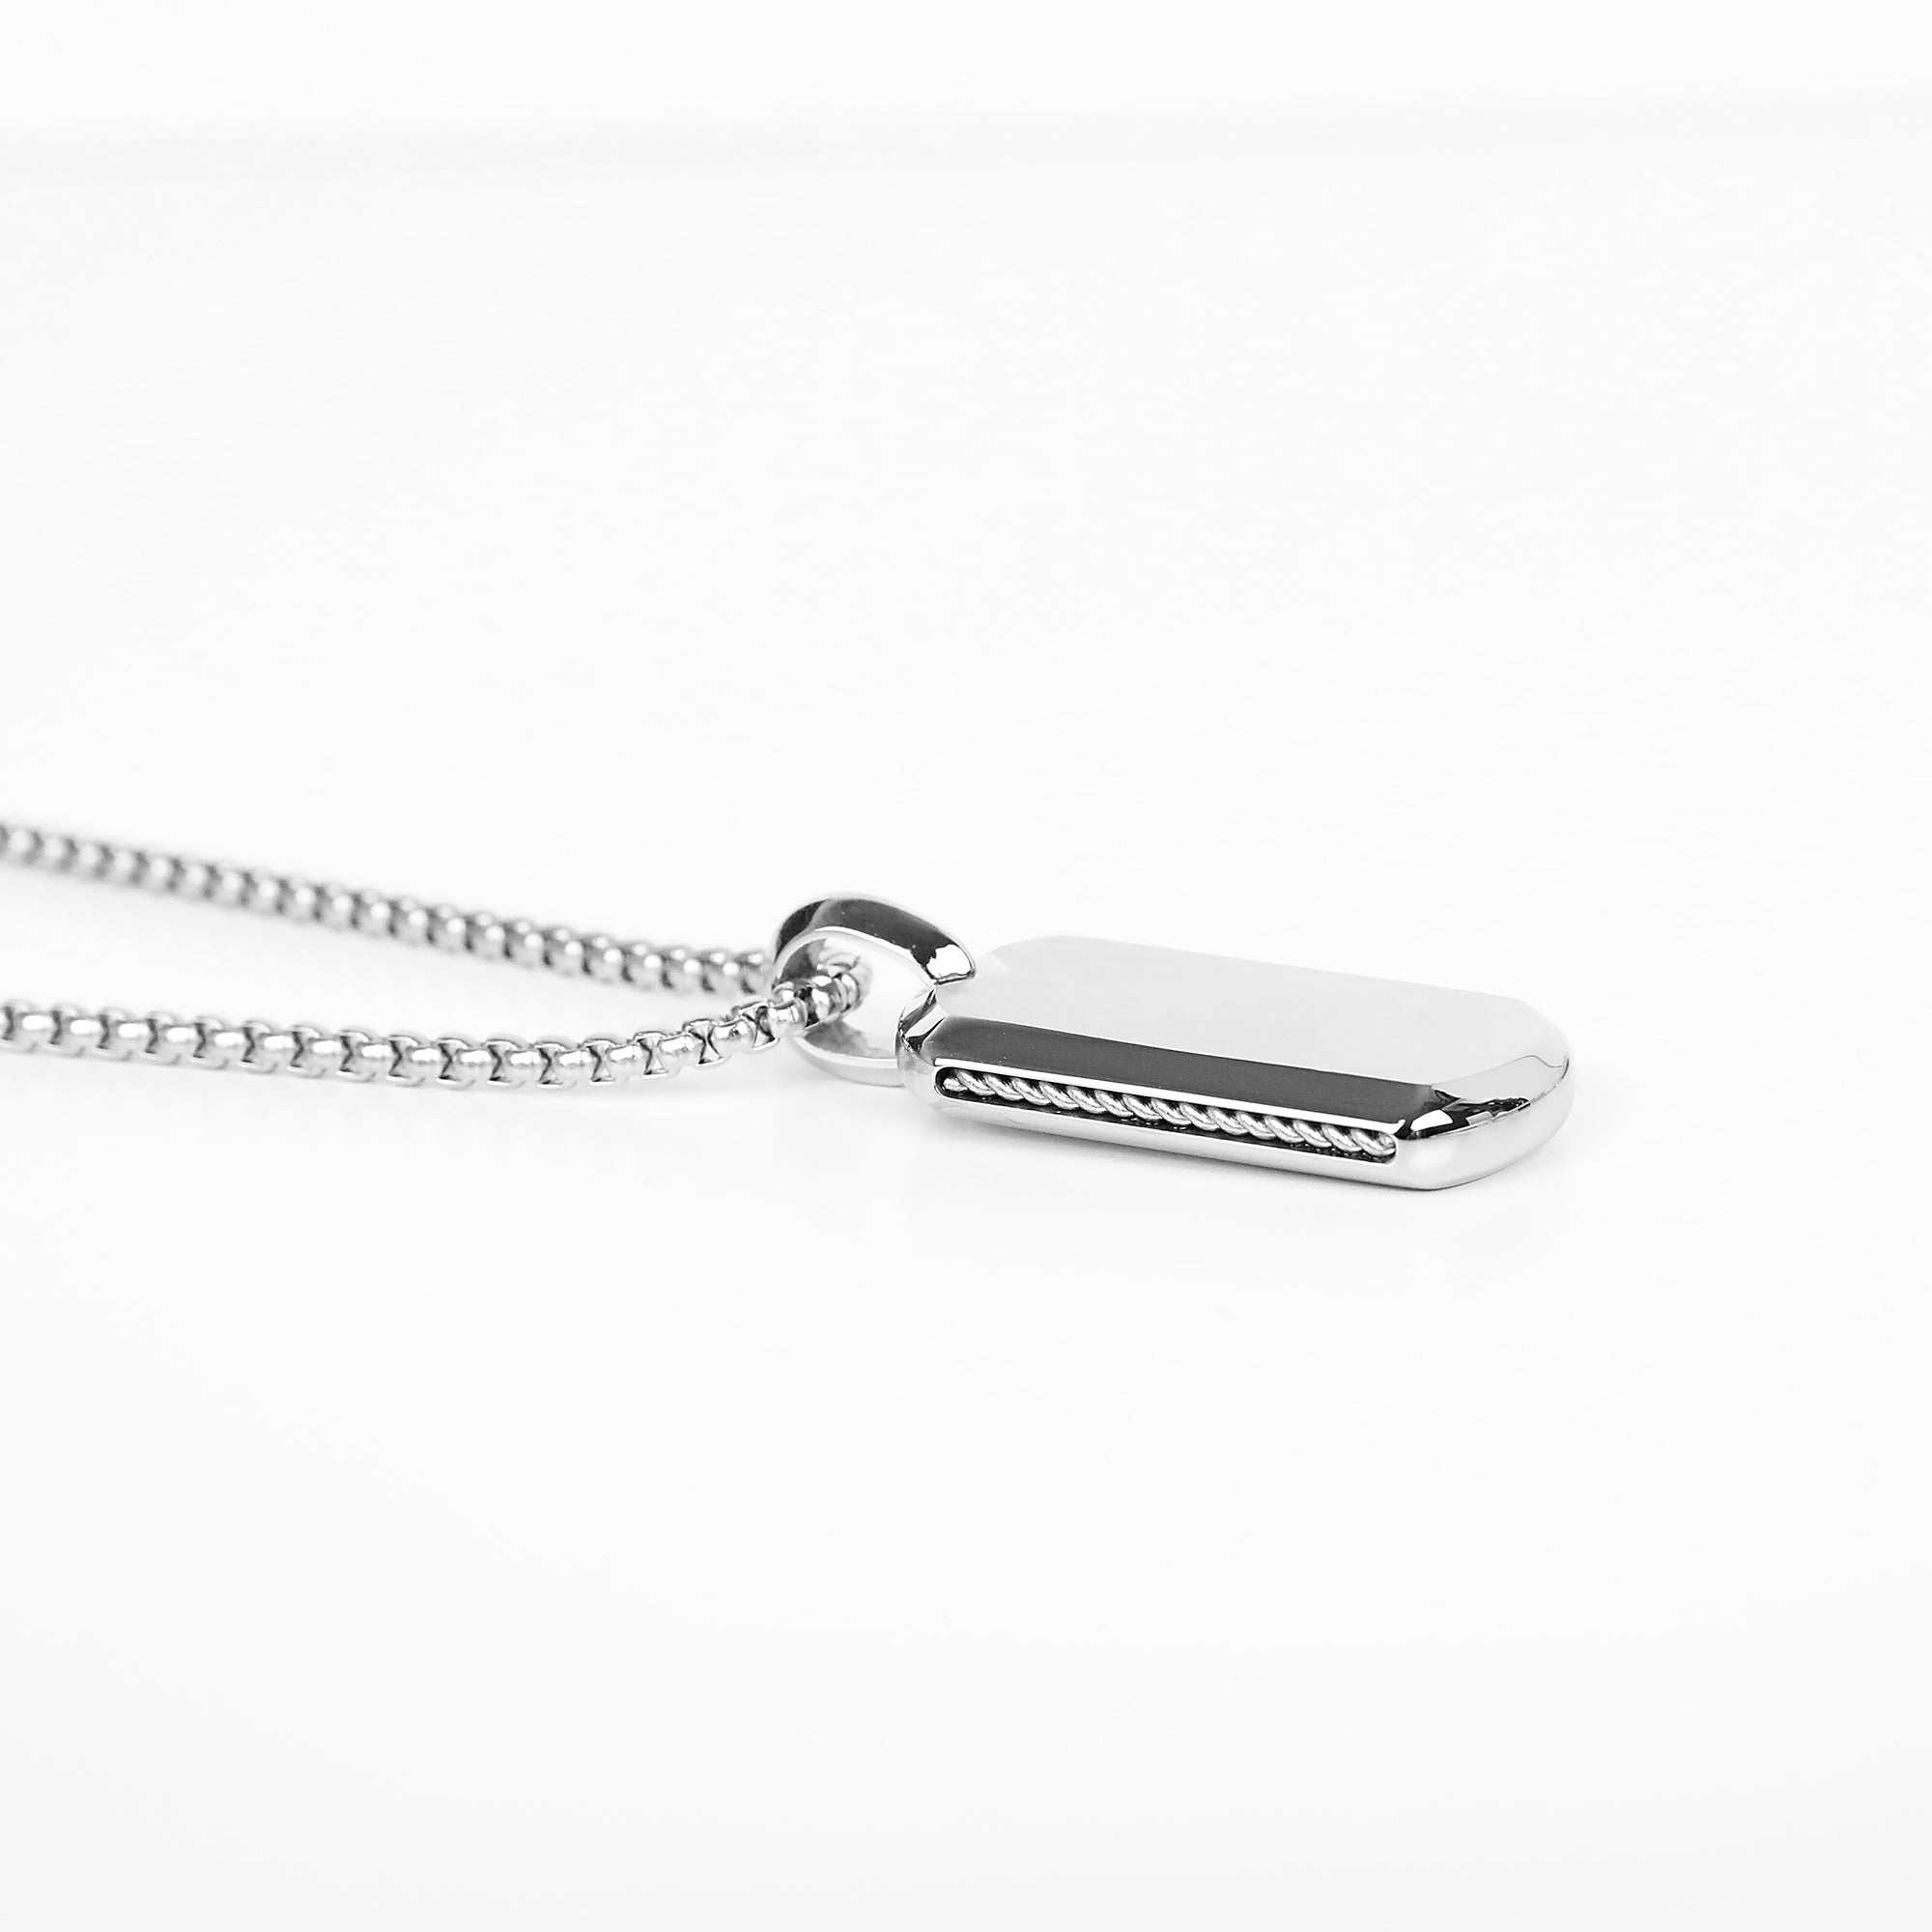 Modern Tag Necklace - Silver